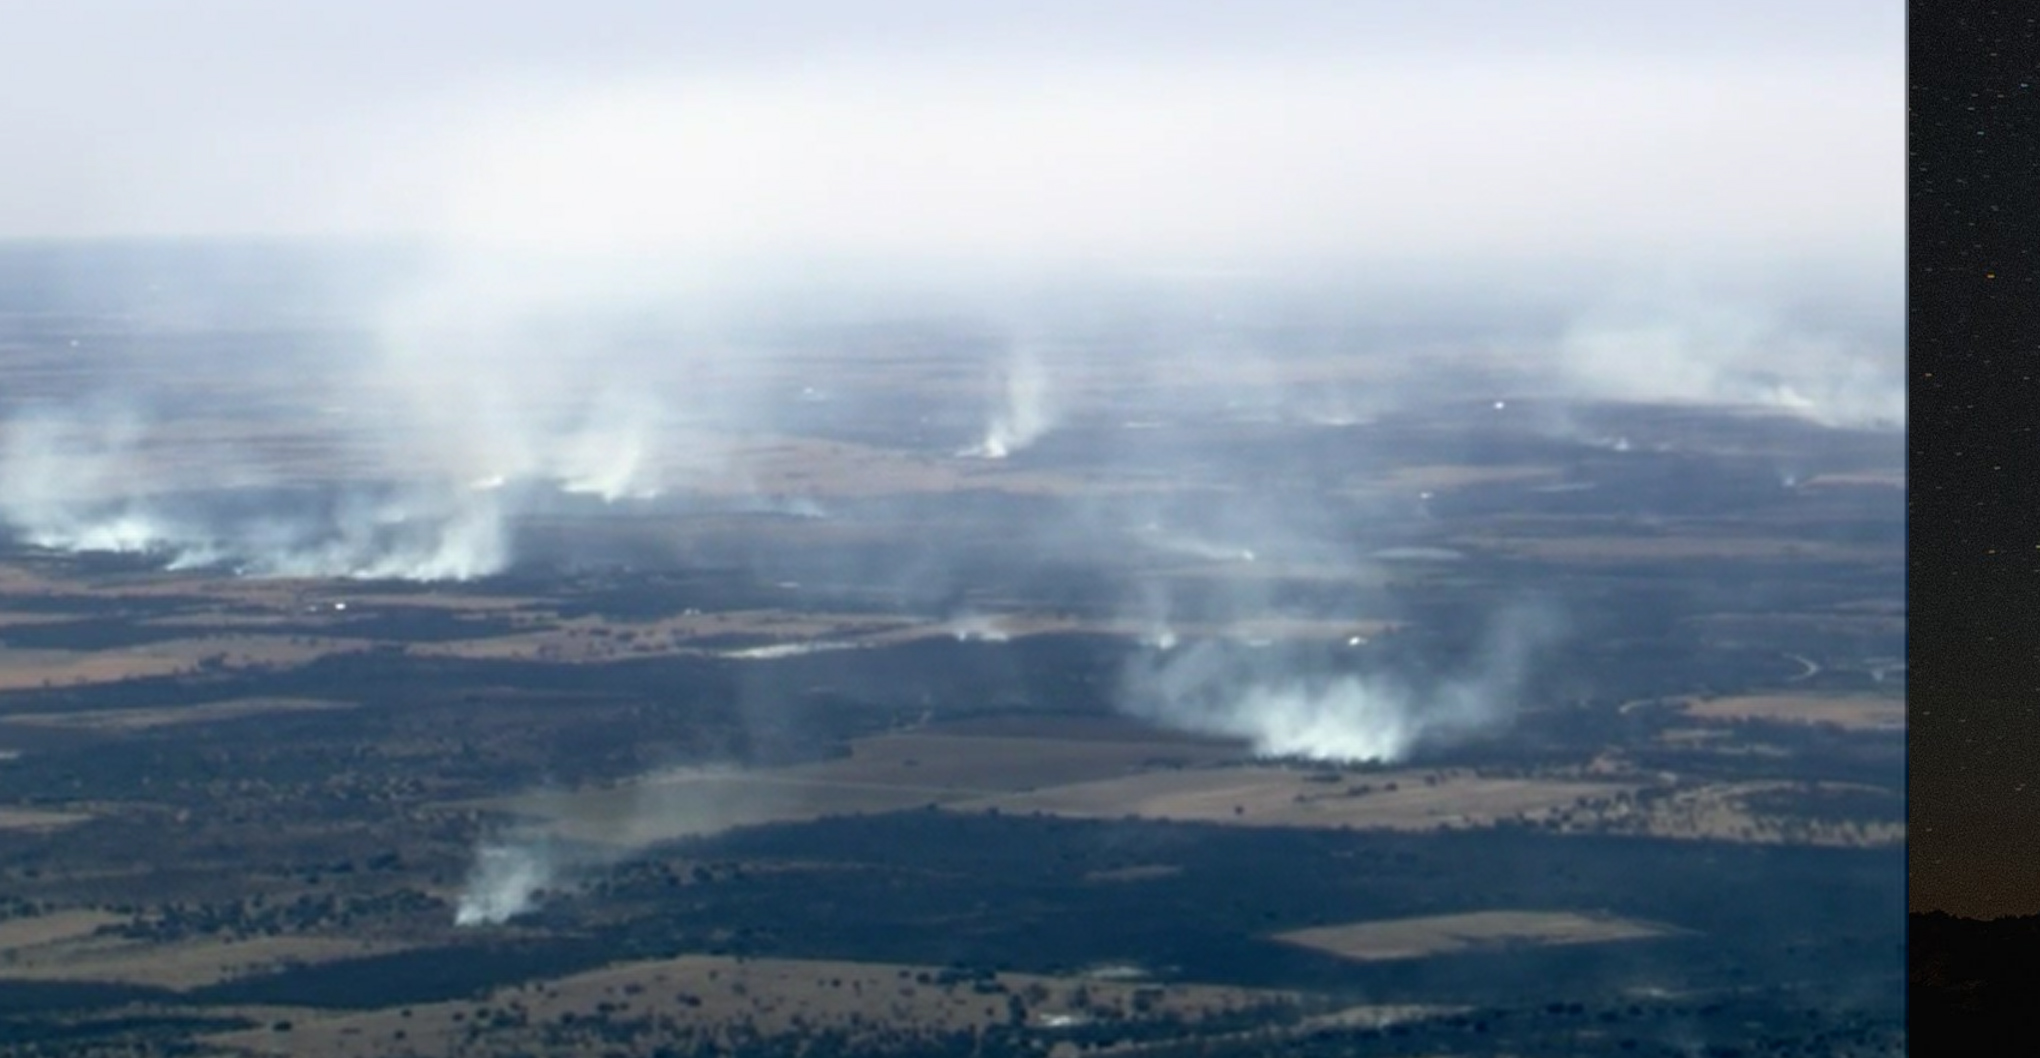 PHOTO: This screen grab from a video shows wildfires burning in Eastland County, Texas, on March 18, 2022.